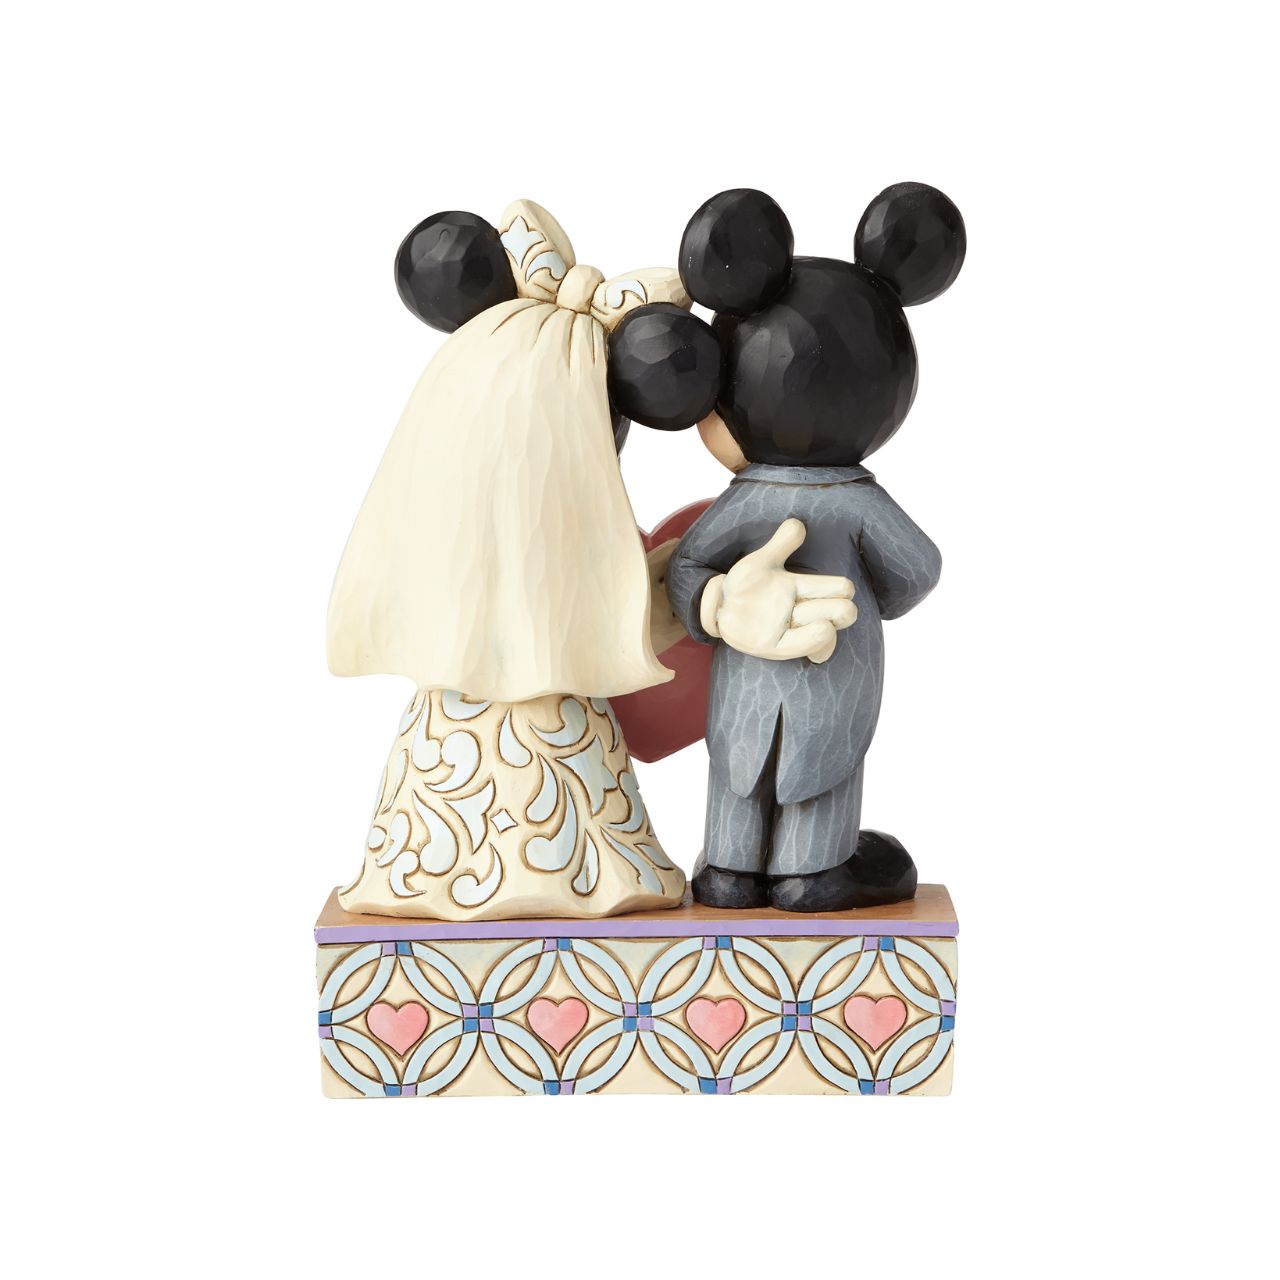 Disney Mickey Mouse and Minnie Mouse Figurine Two Souls, One Heart  This beautifully detailed figurine is a gorgeous depiction of Mickey as a doting groom with quilted accents on his suit and Minnie as a blushing bride in a gown with rosemaling details.